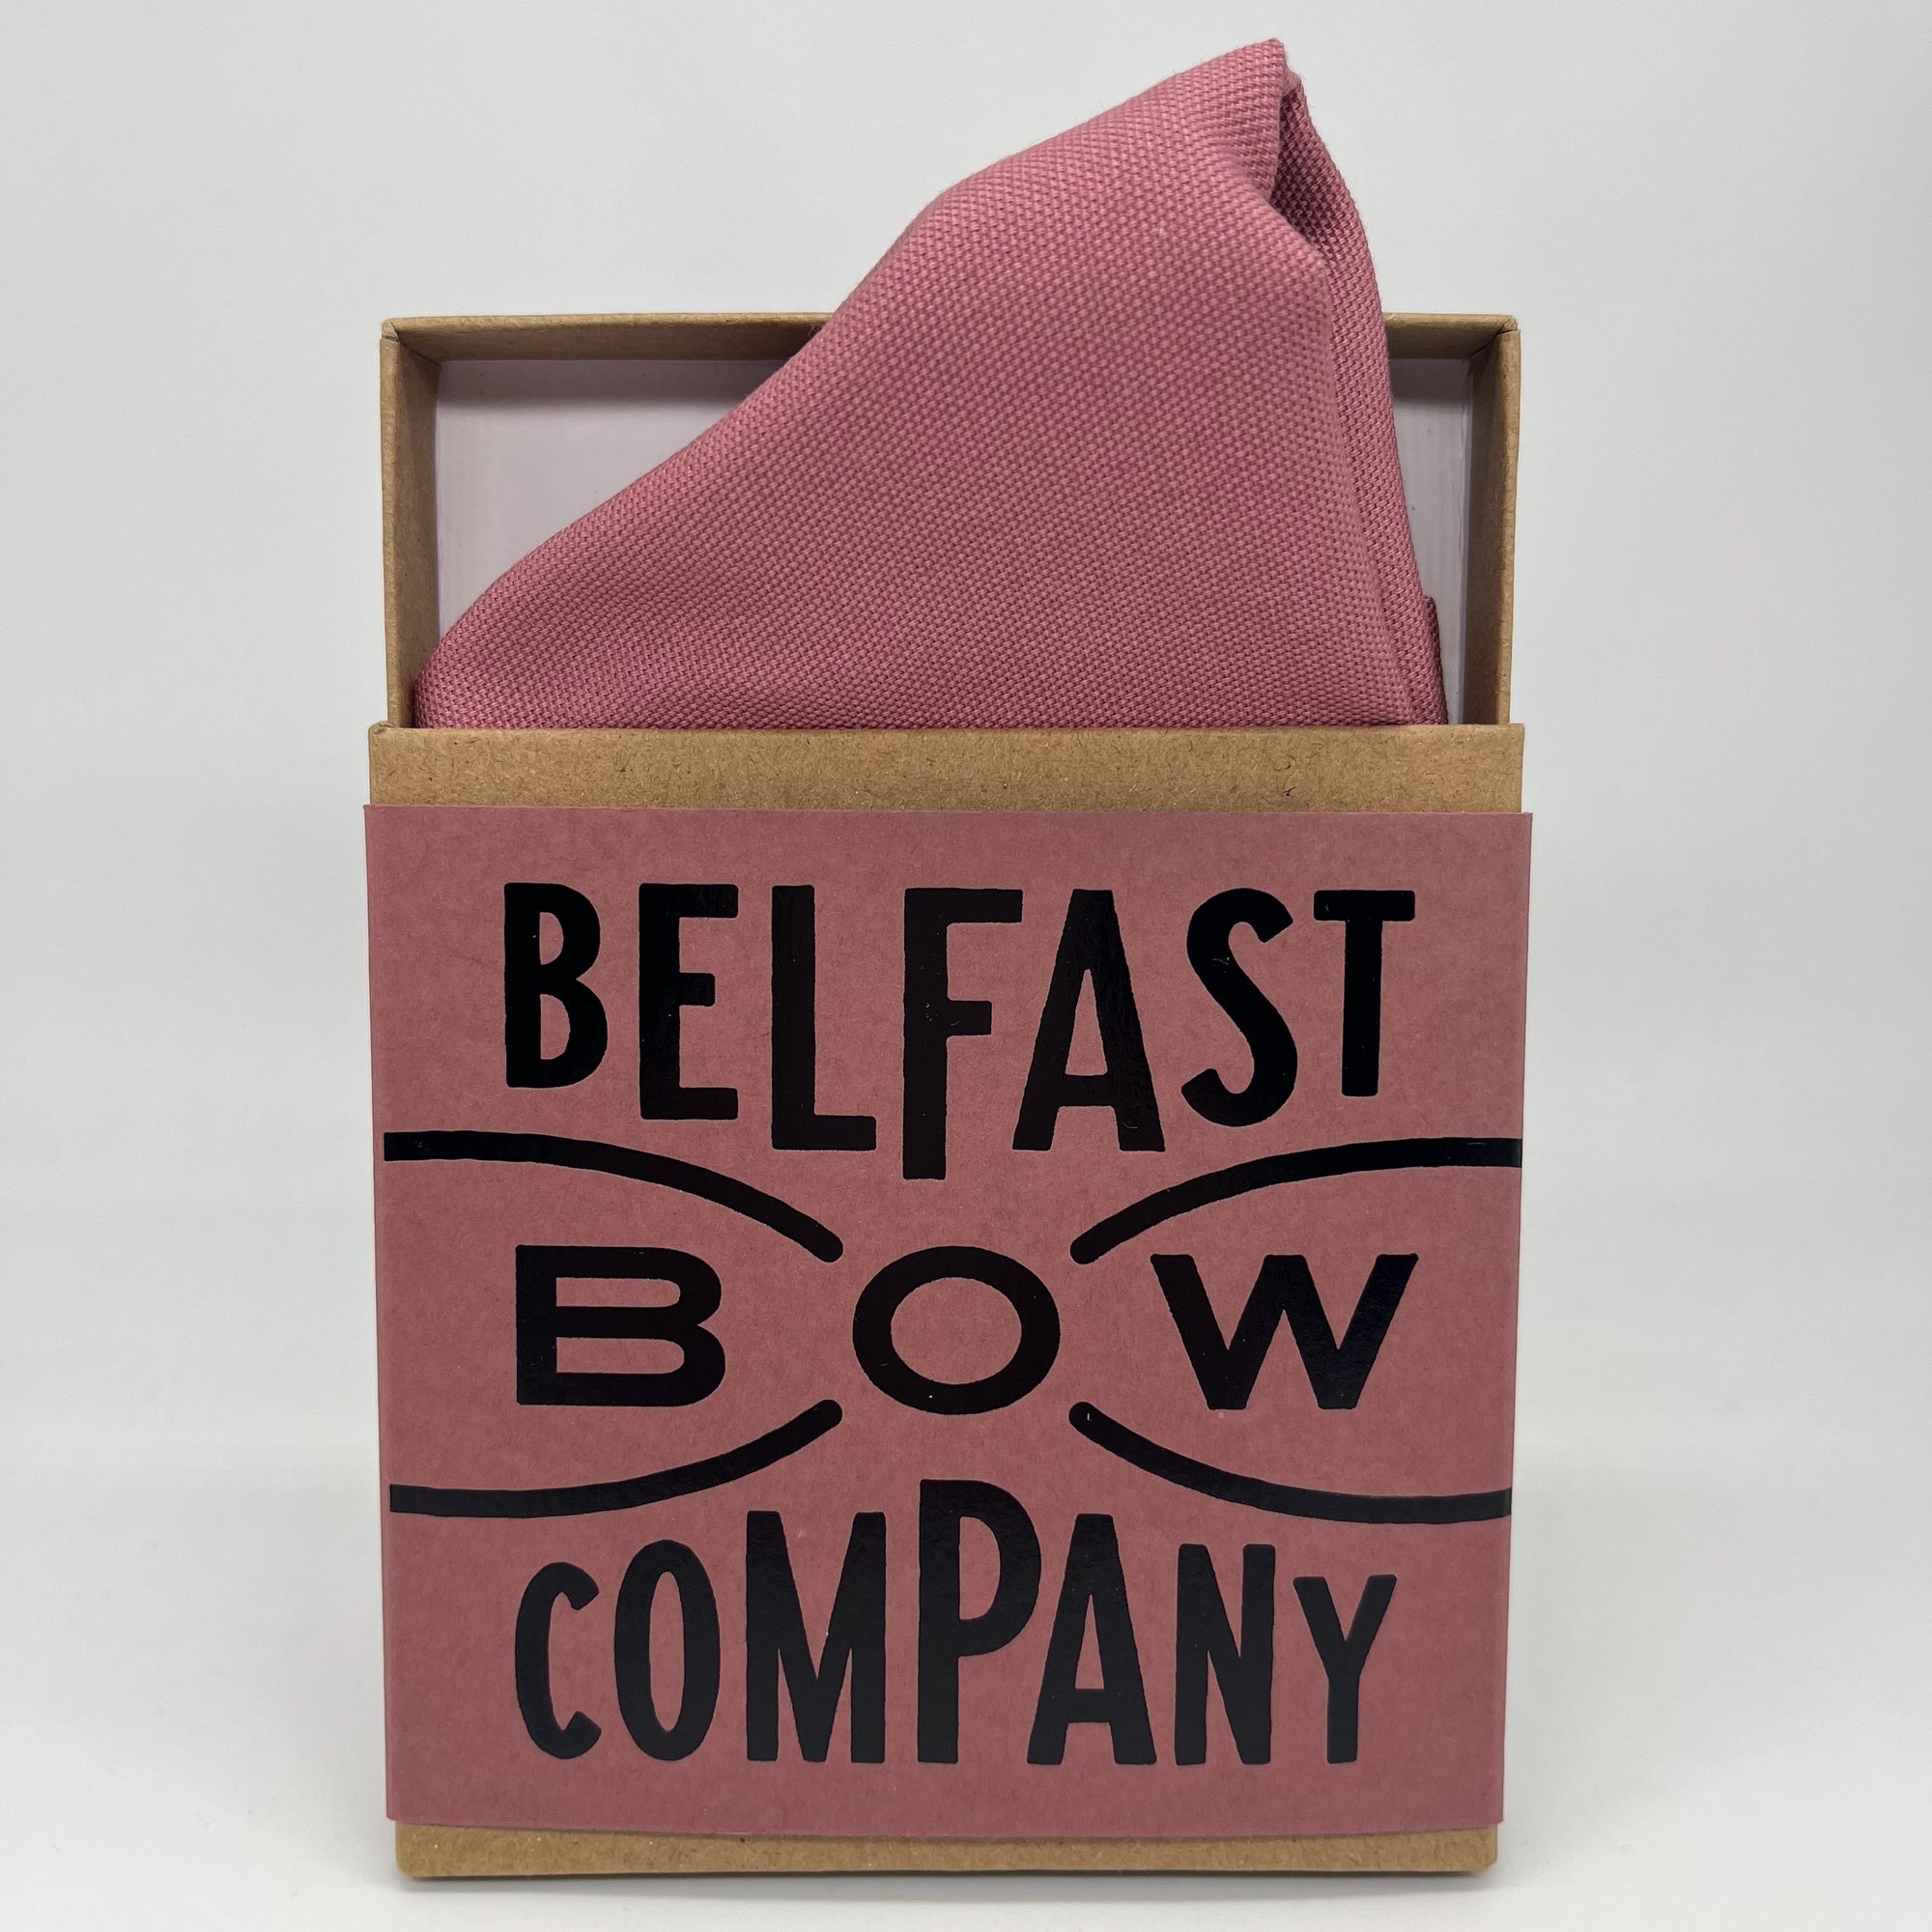 Dusky Pink pocket square in cotton by the belfast bow company